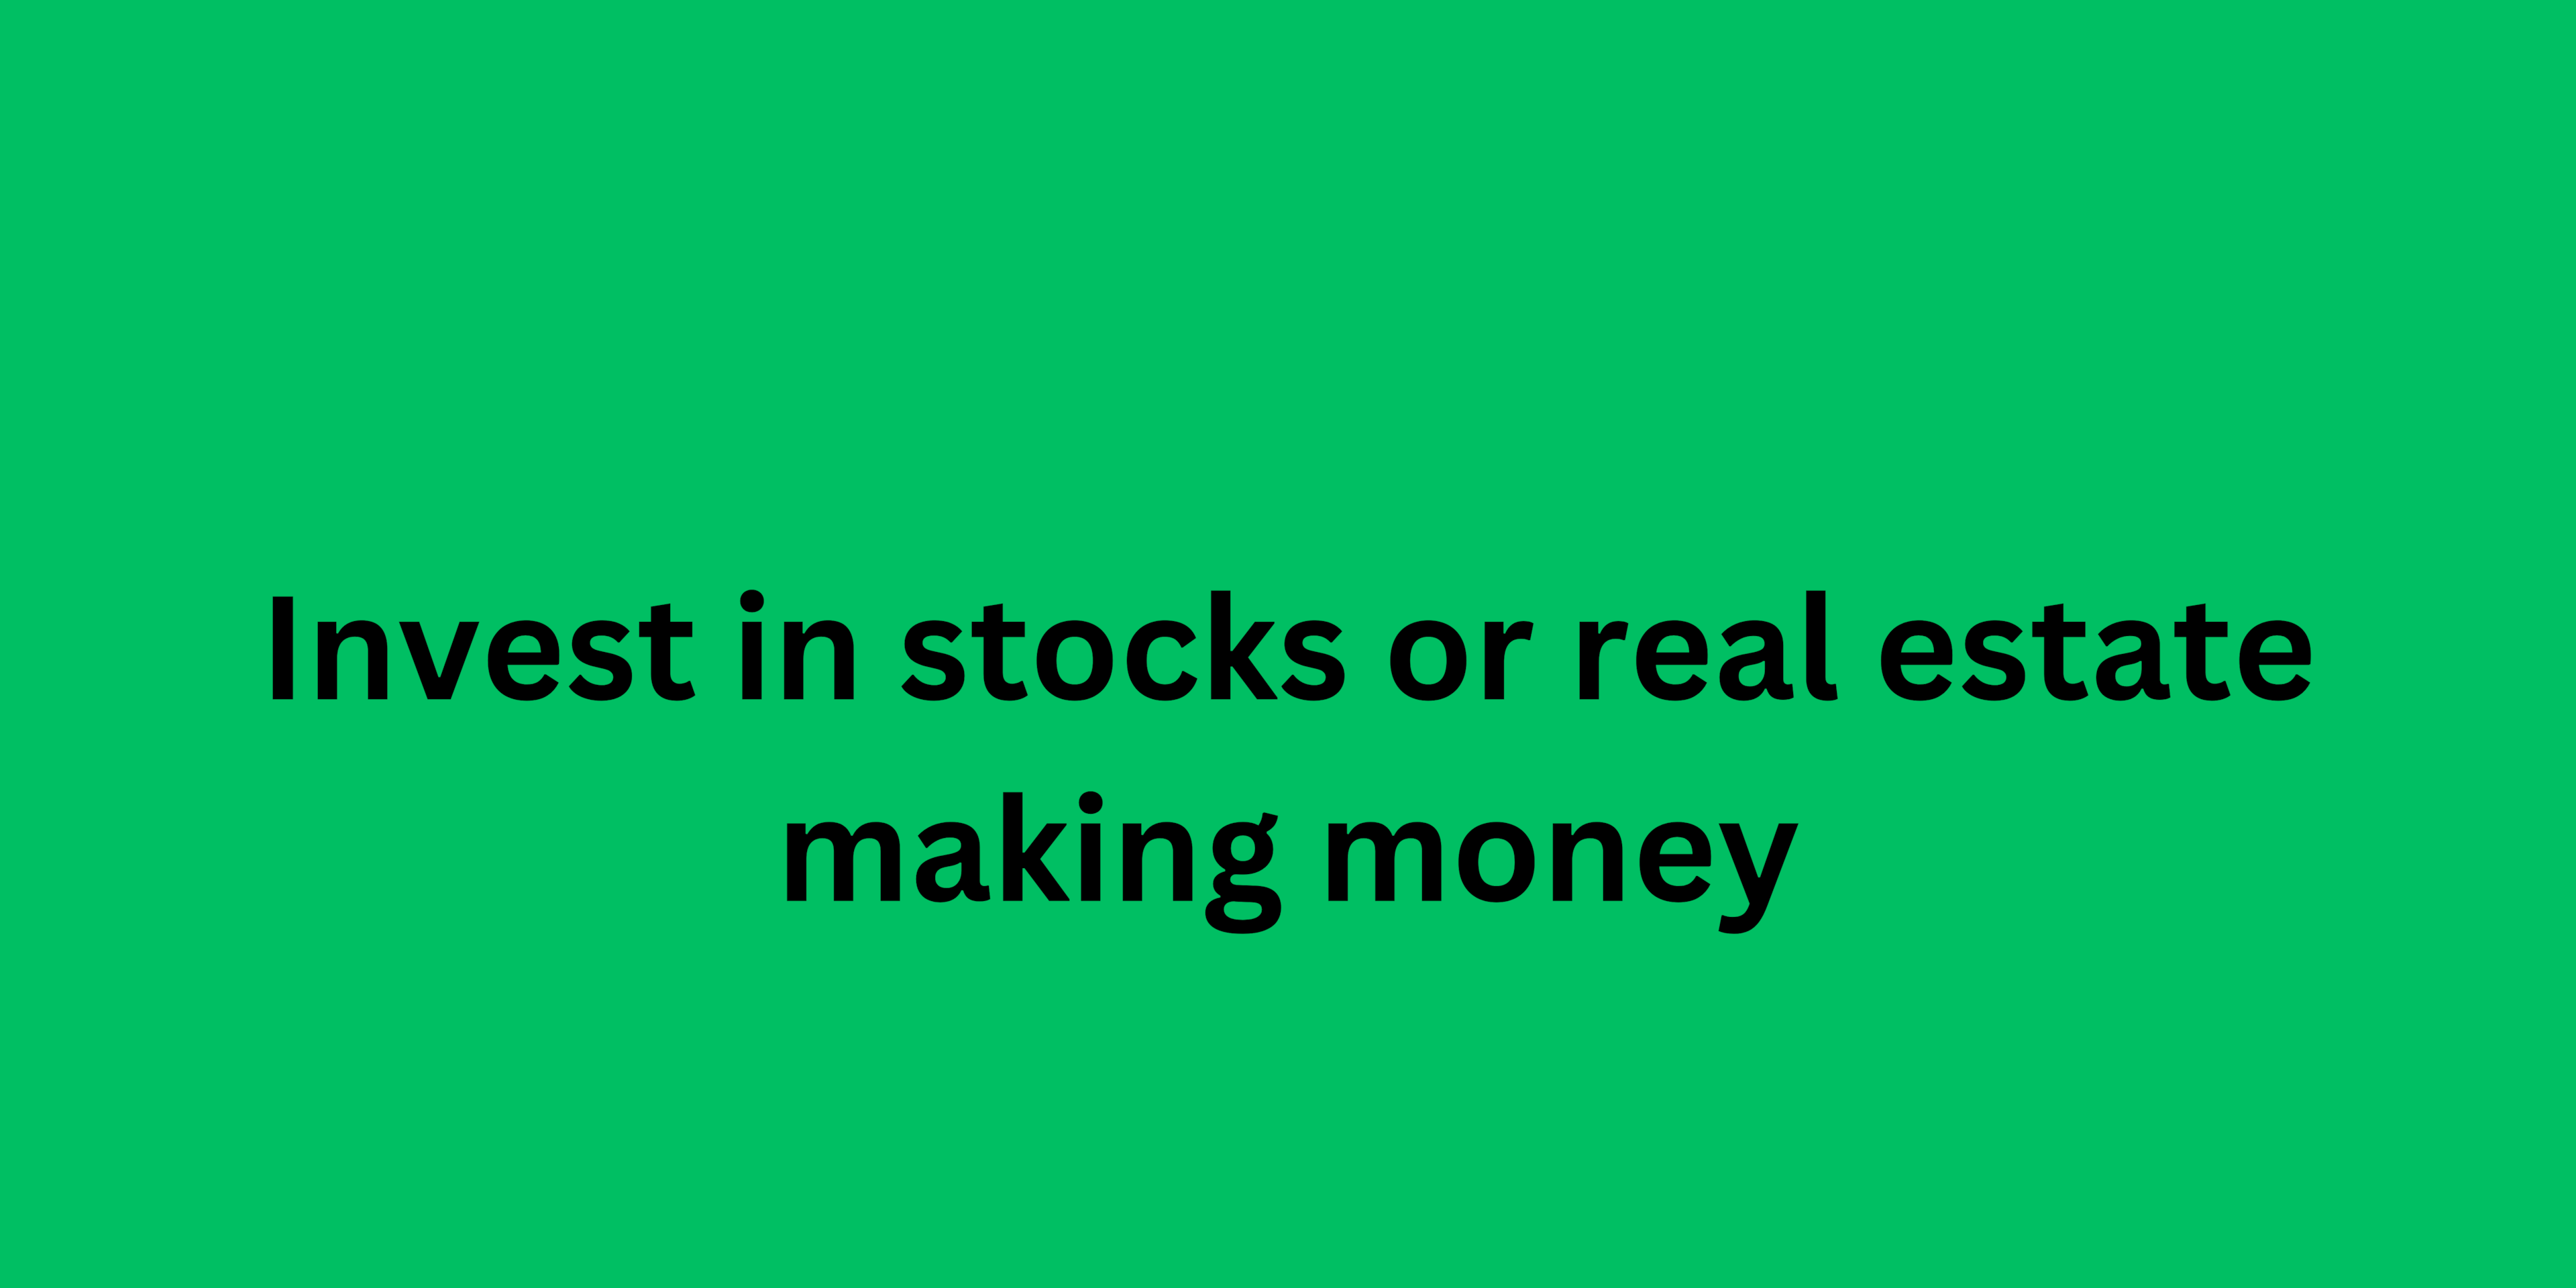 Invest in stocks or real estate making money